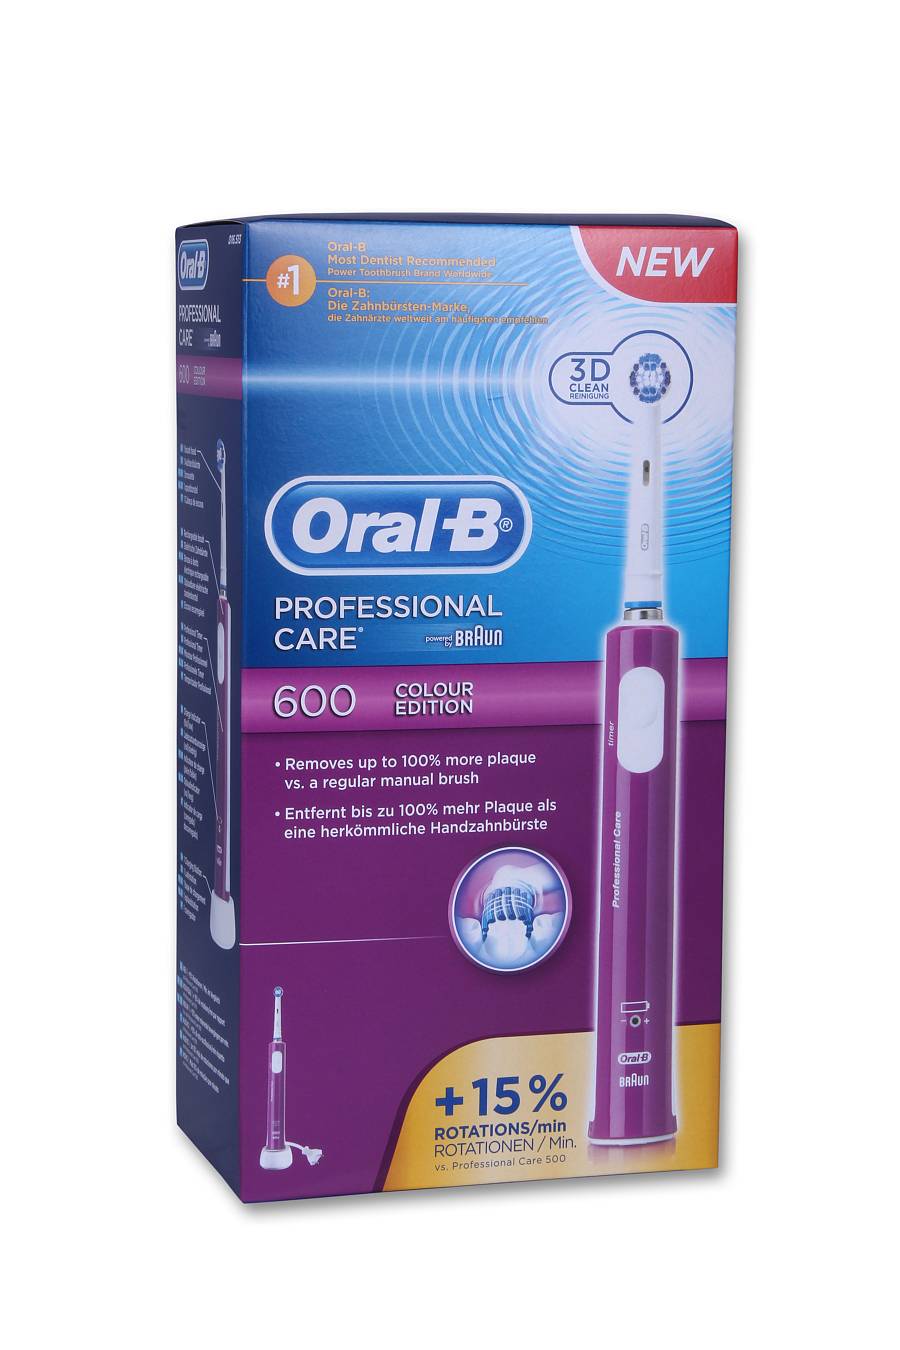 Oral-B Profassional Care 3D 600 Colour Pink